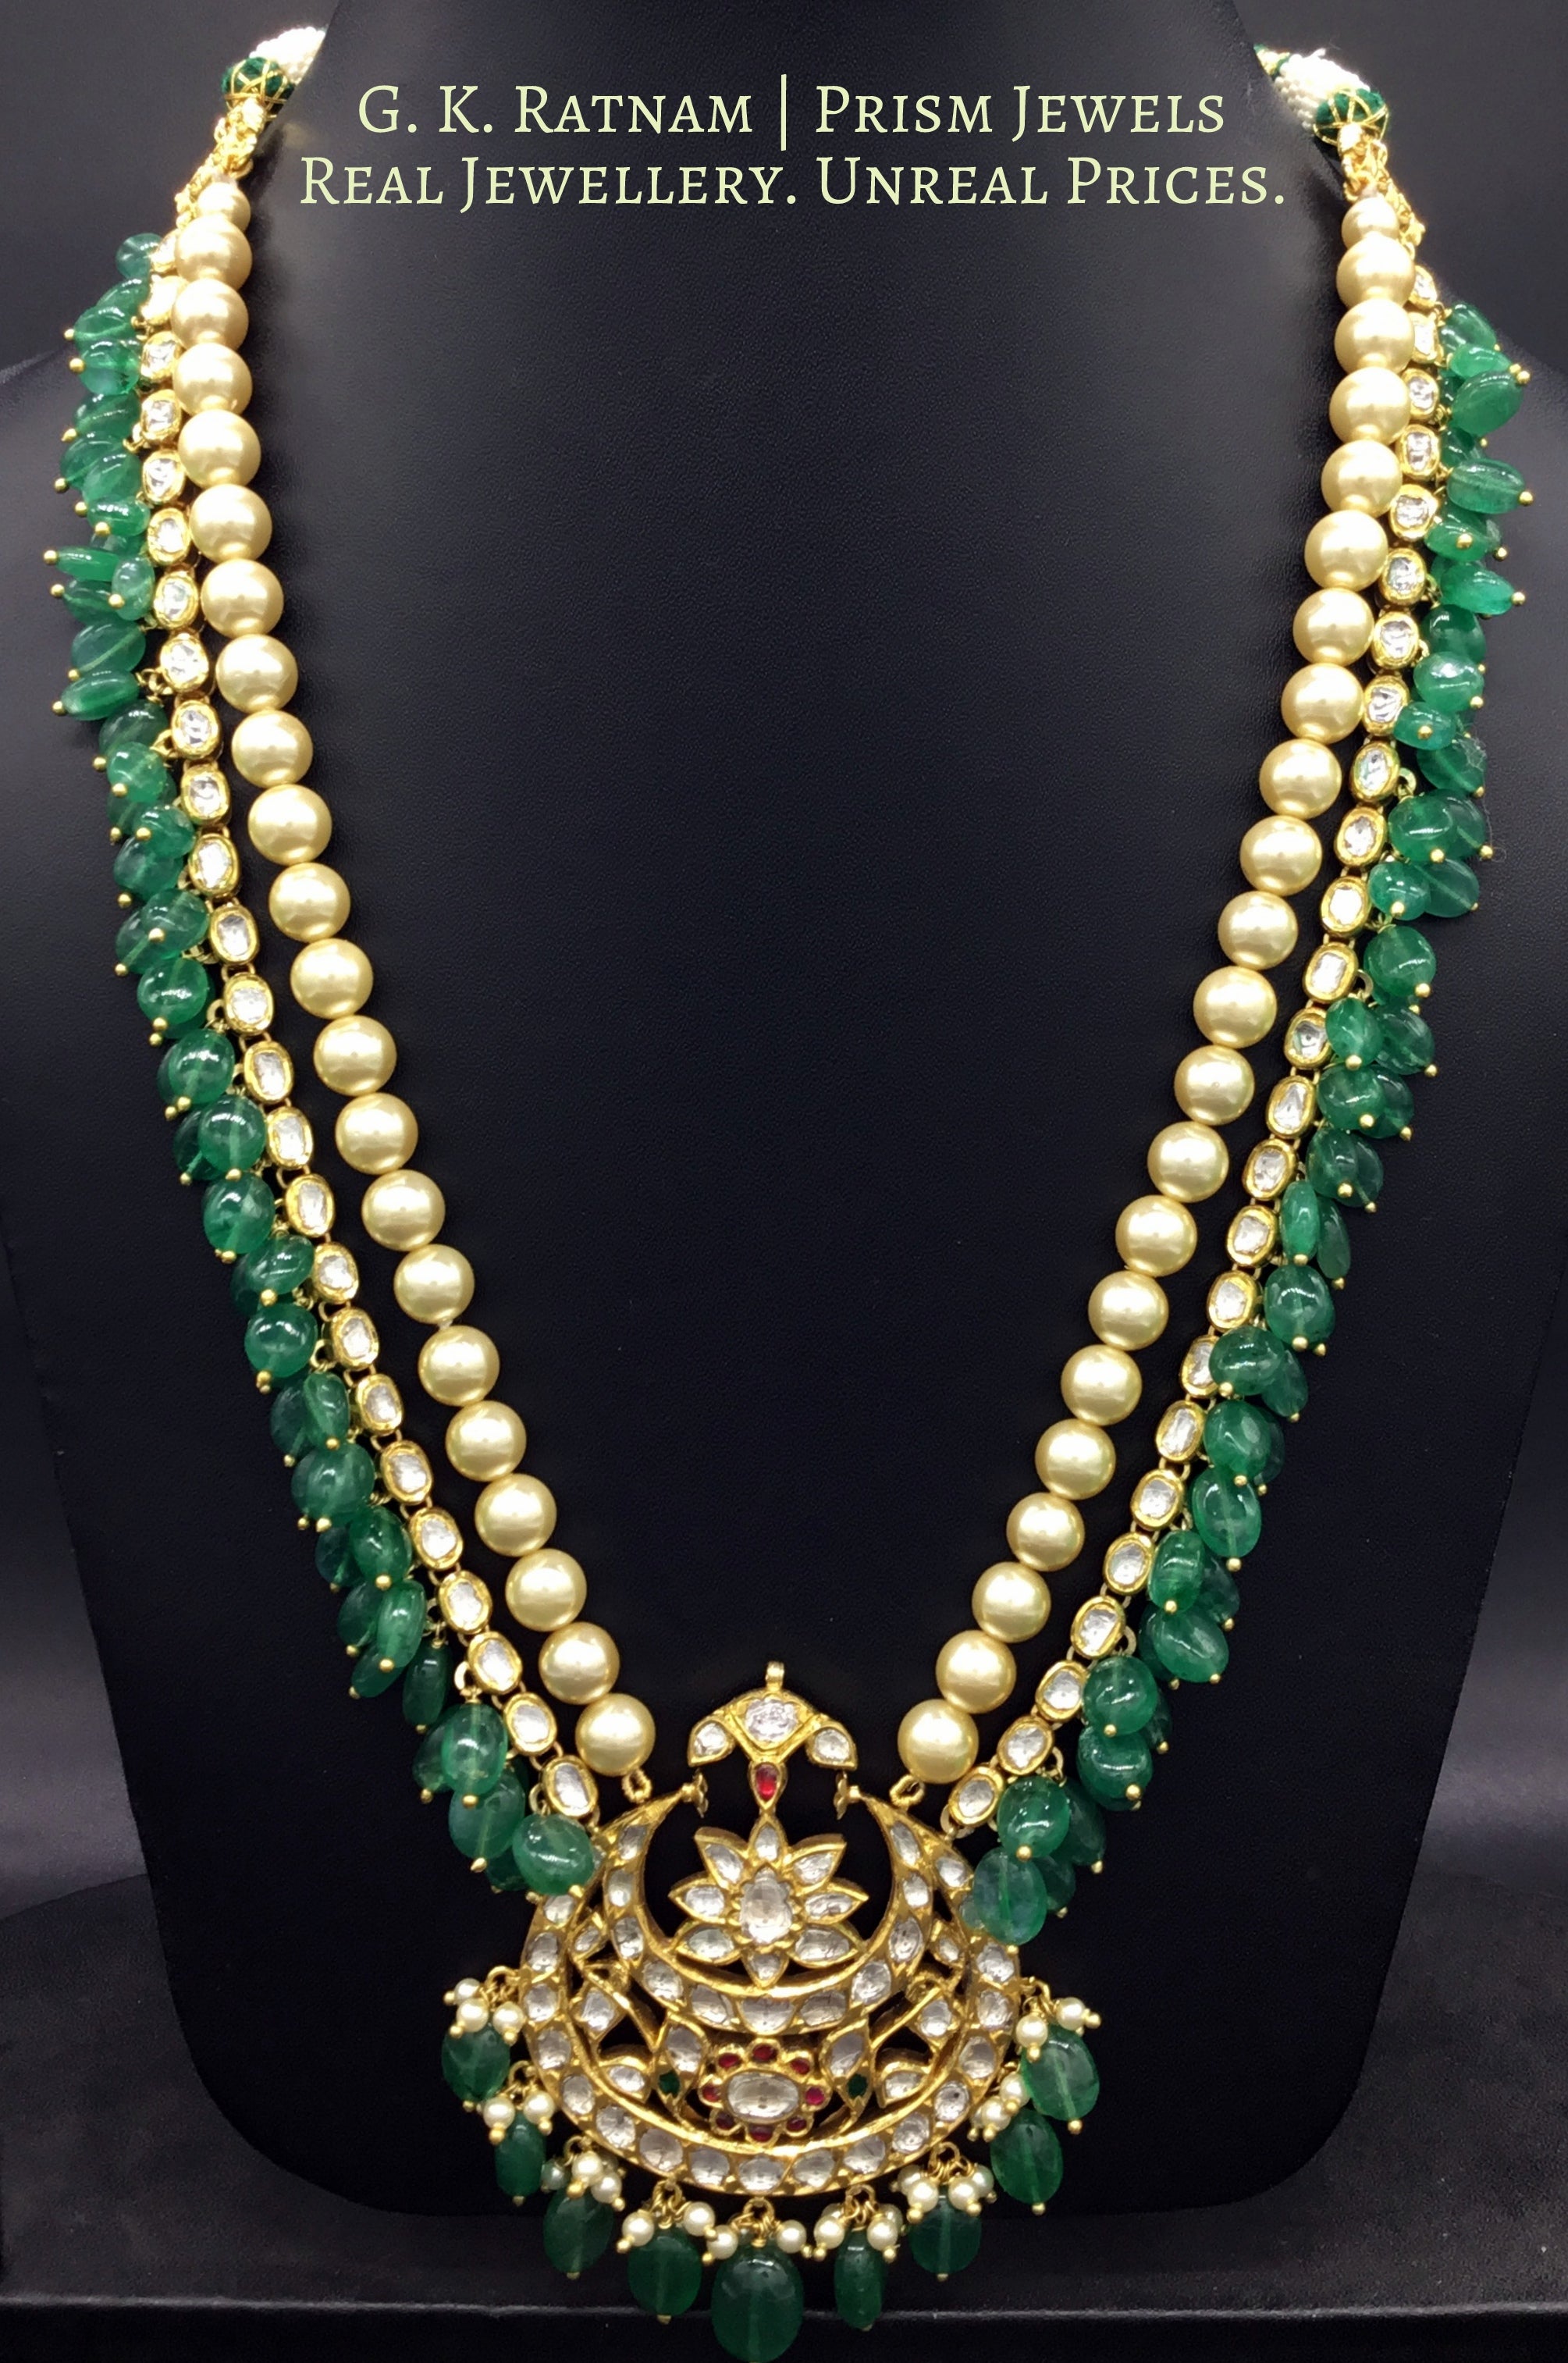 18k Gold and Diamond Polki chand-shaped Pendant strung to uncut ovals enhanced with Green Beryls - G. K. Ratnam